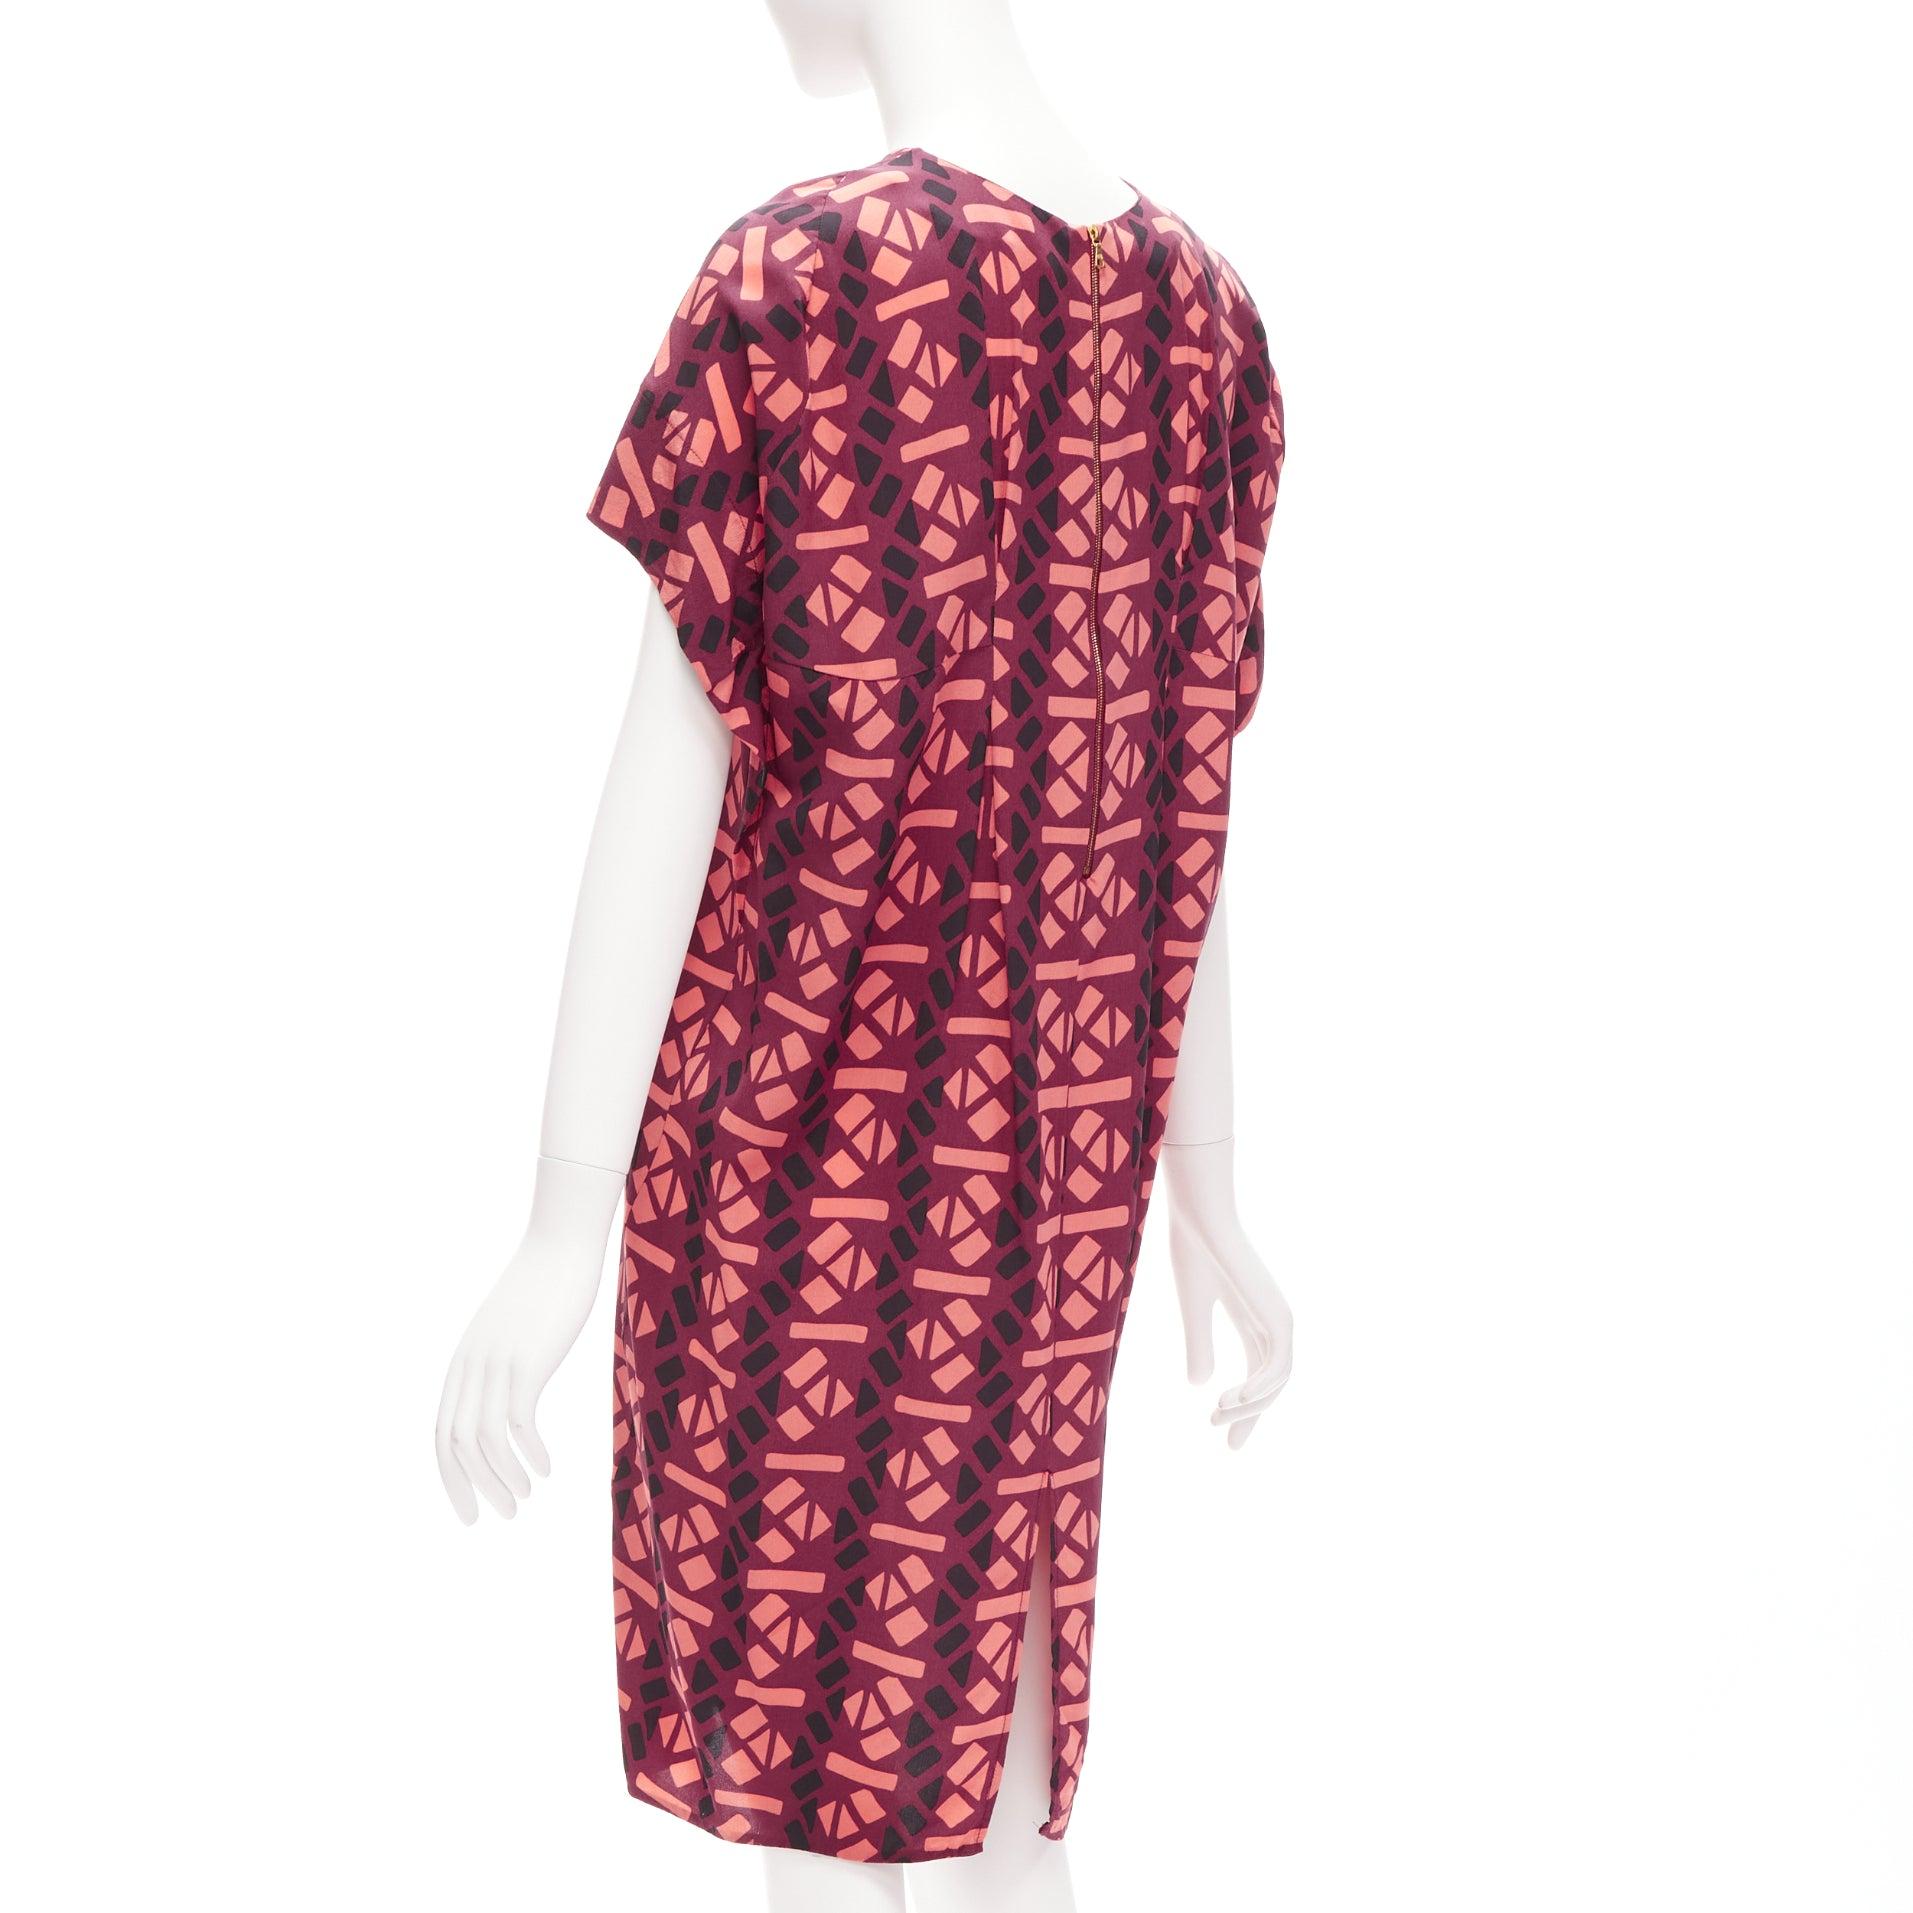 MARNI 100% silk burgundy pink geometric print cap sleeves dress IT36 XS
Reference: CELG/A00284
Brand: Marni
Material: Silk
Color: Burgundy, Pink
Pattern: Geometric
Closure: Zip
Extra Details: Back zip.
Made in: Italy

CONDITION:
Condition: